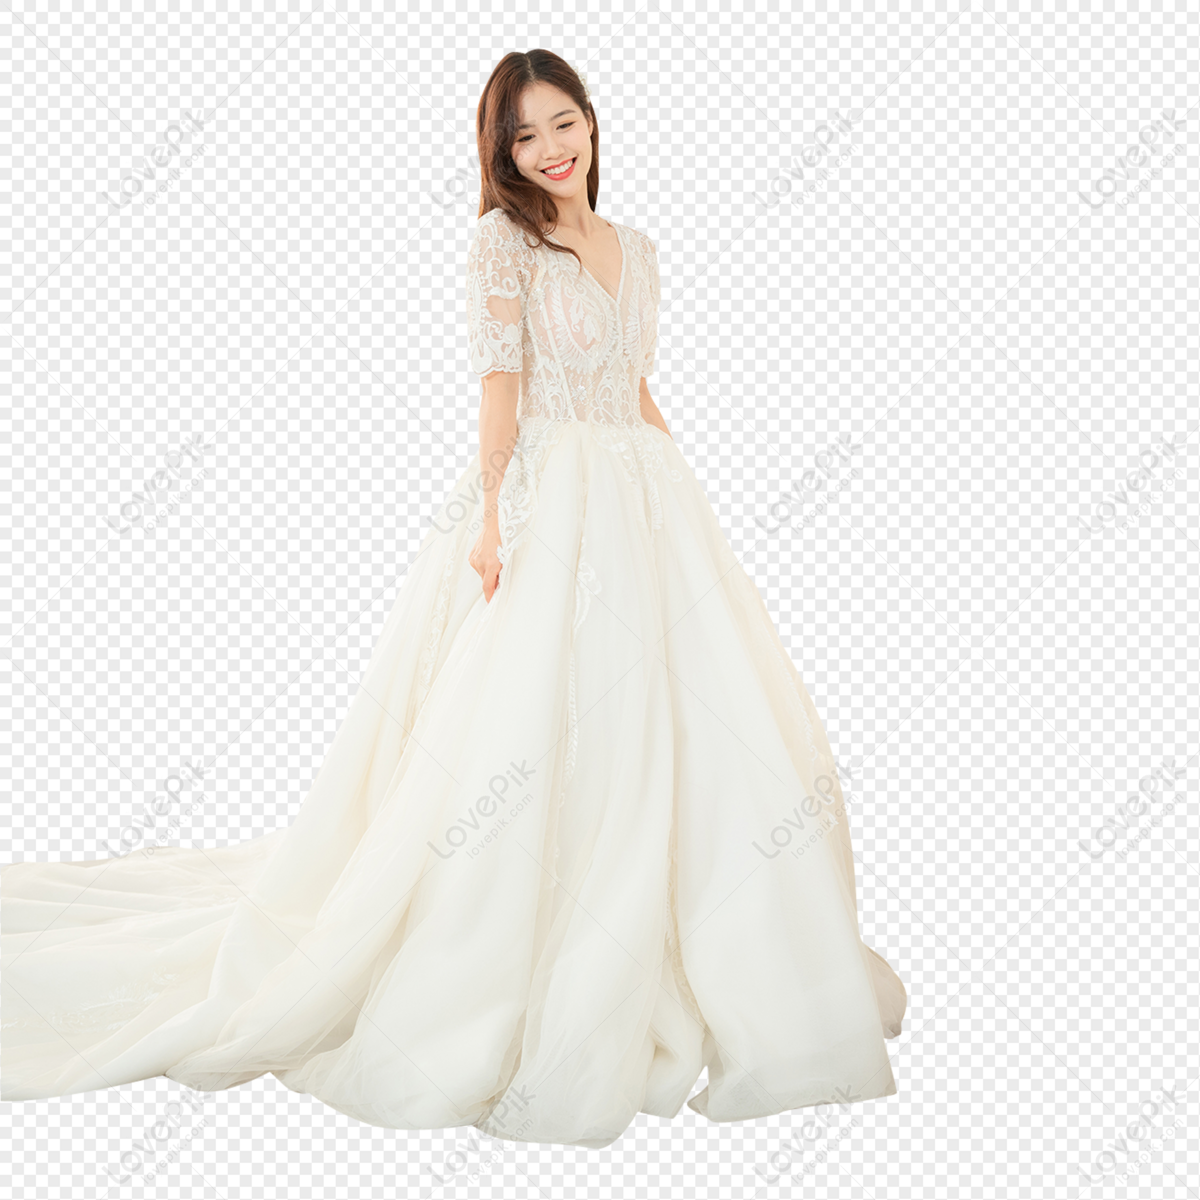 These Are the Best Wedding Dress Materials | Who What Wear